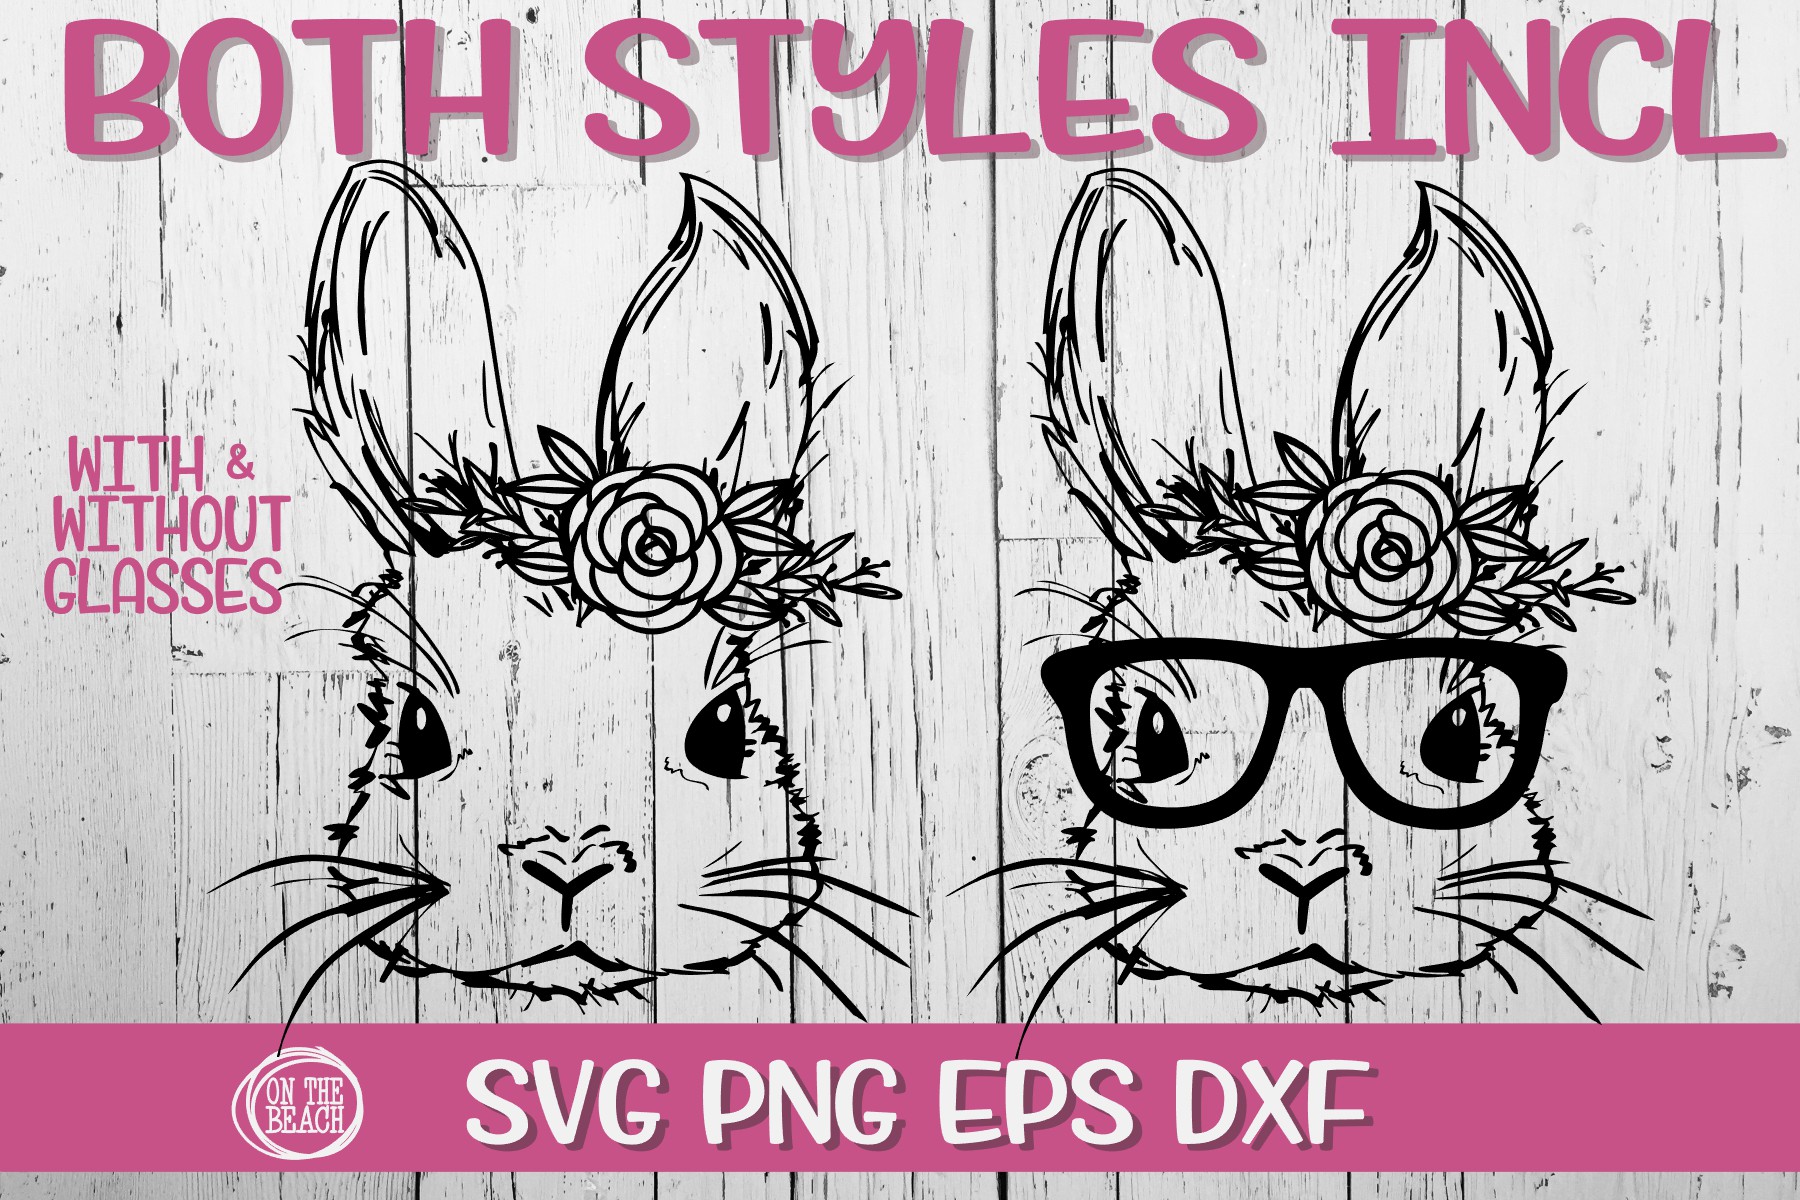 Download Bunny With Glasses - SVG PNG EPS DXF (499869) SVGs.